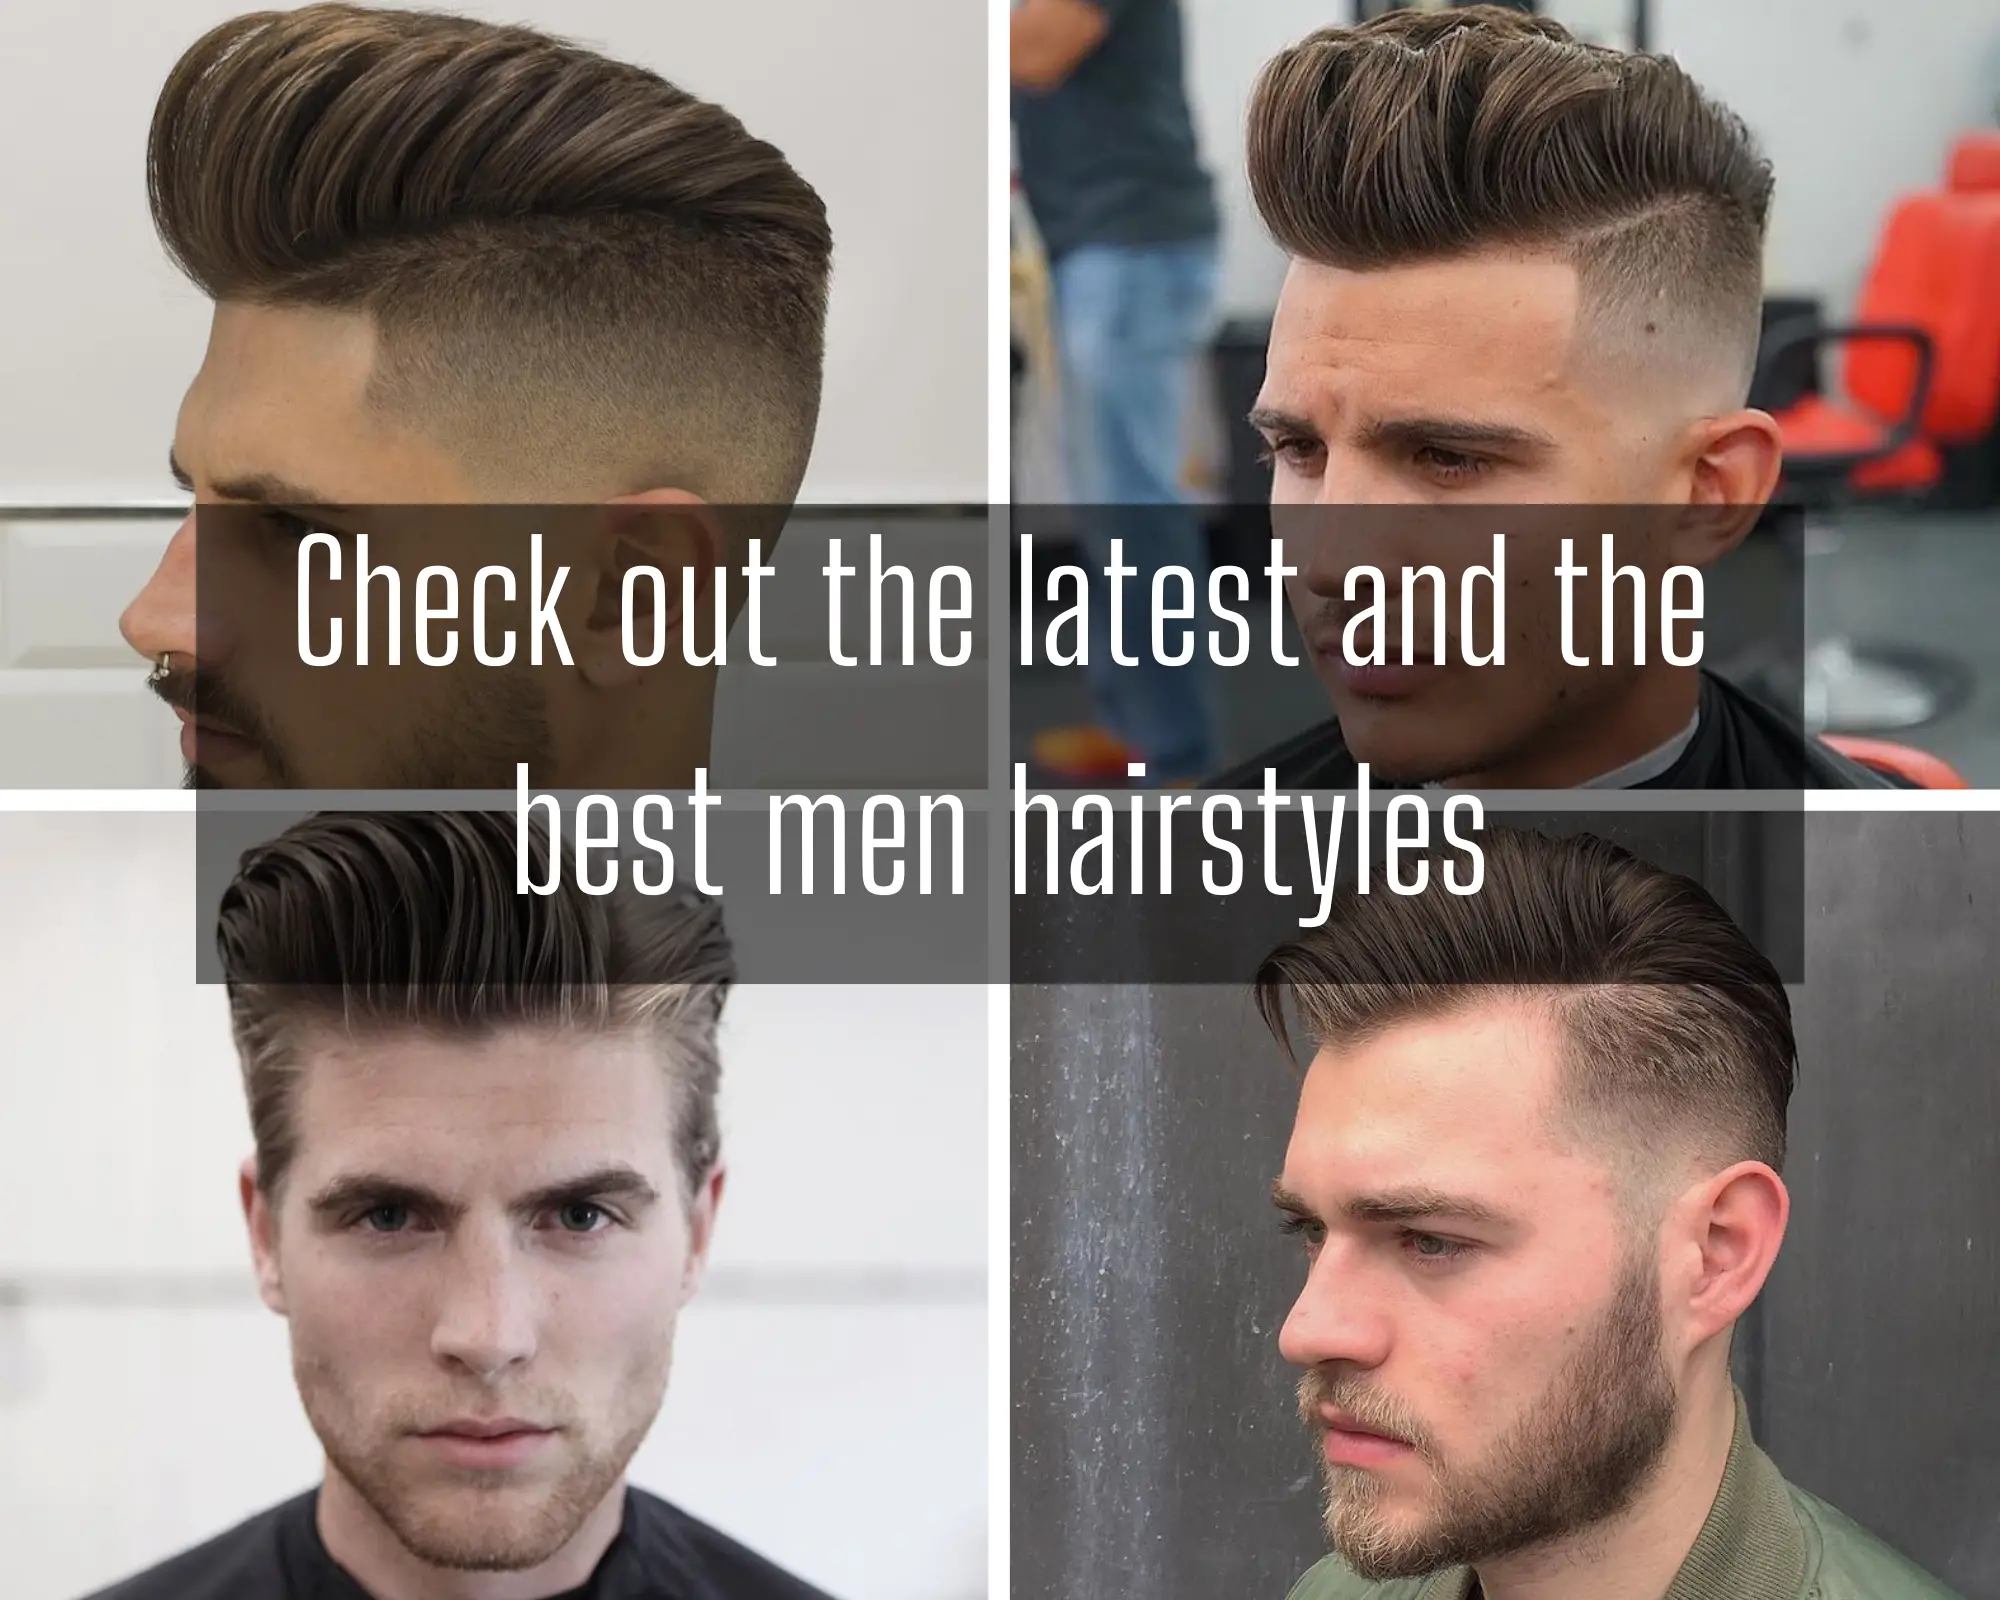 Check out the latest and the best men hairstyles